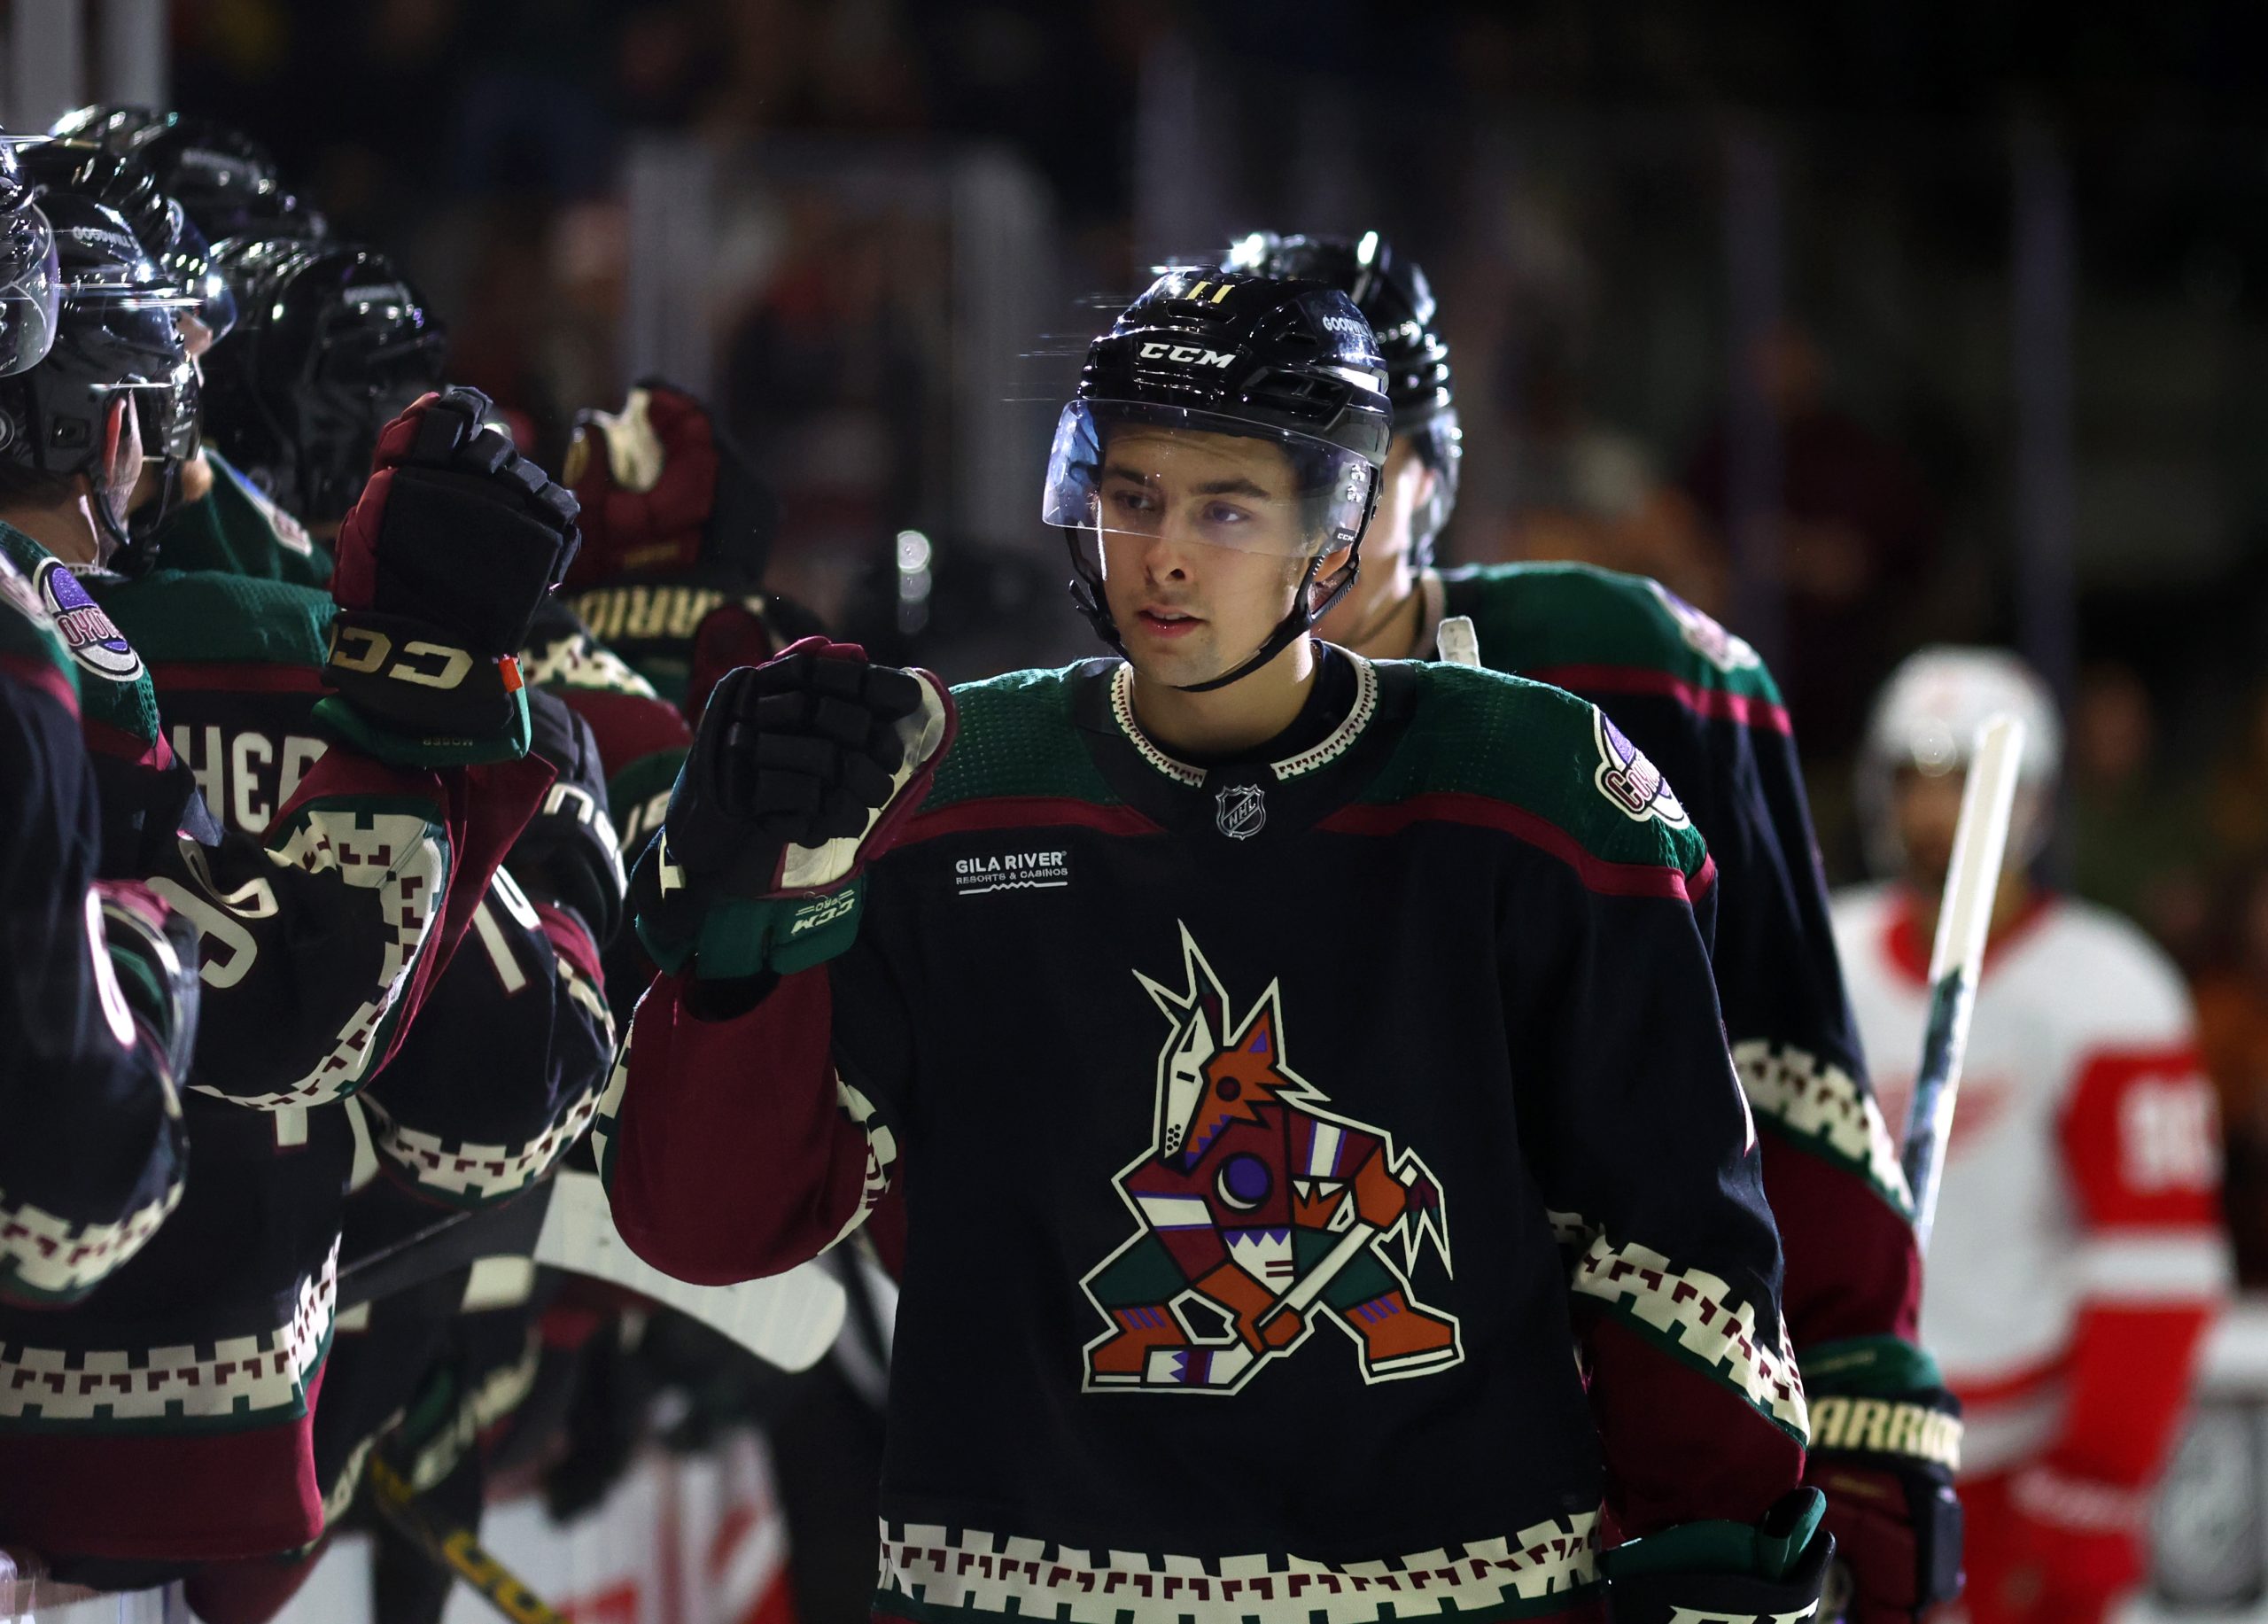 The Arizona Coyotes are out of control and it's time for the NHL